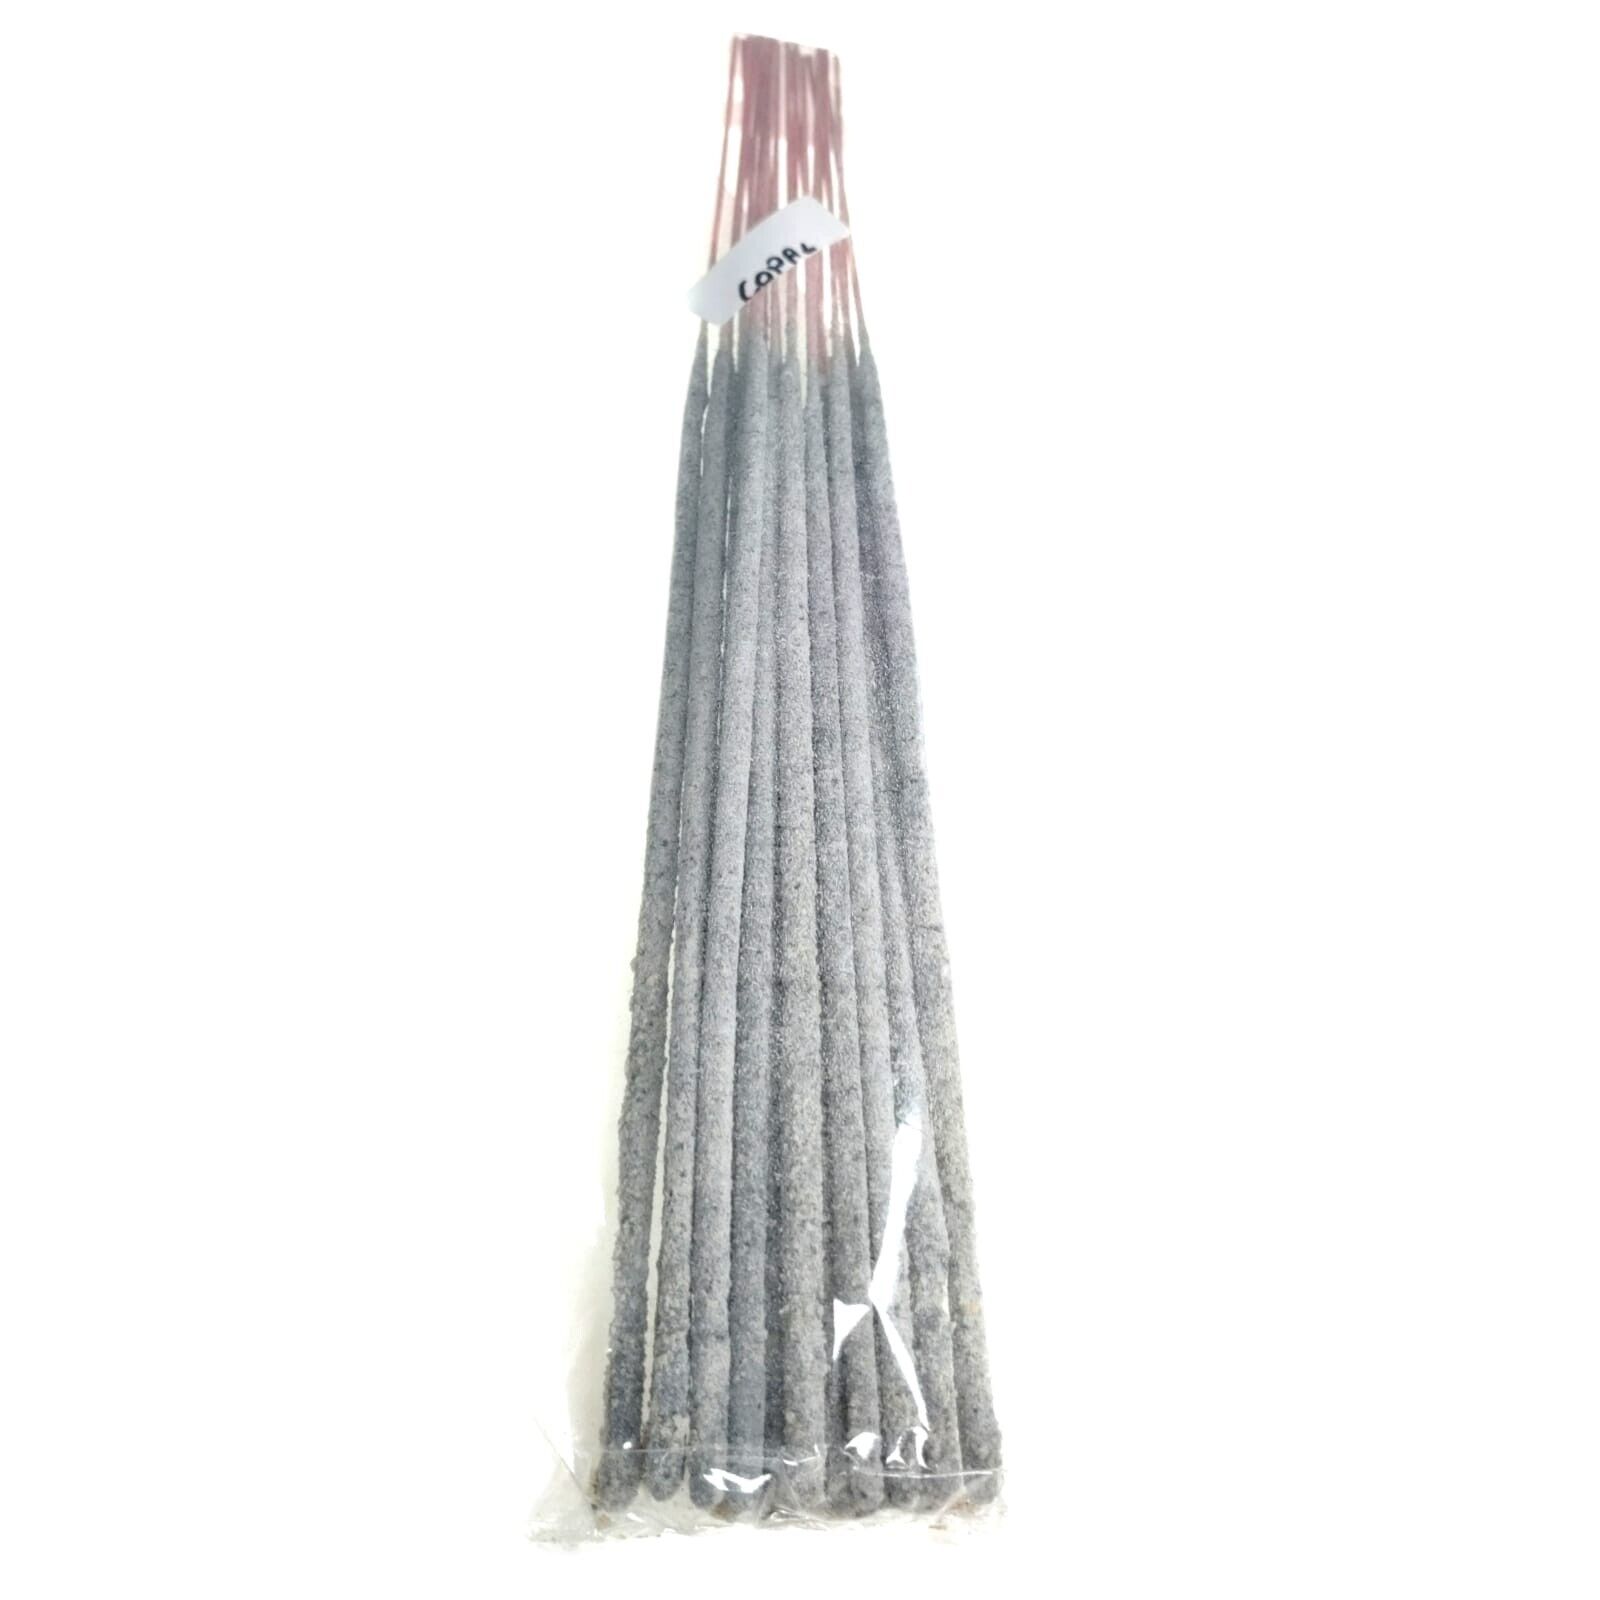 20 Sticks of Deluxe Mayan Aztec Ritual Copal Incense Resin - Highest Quality